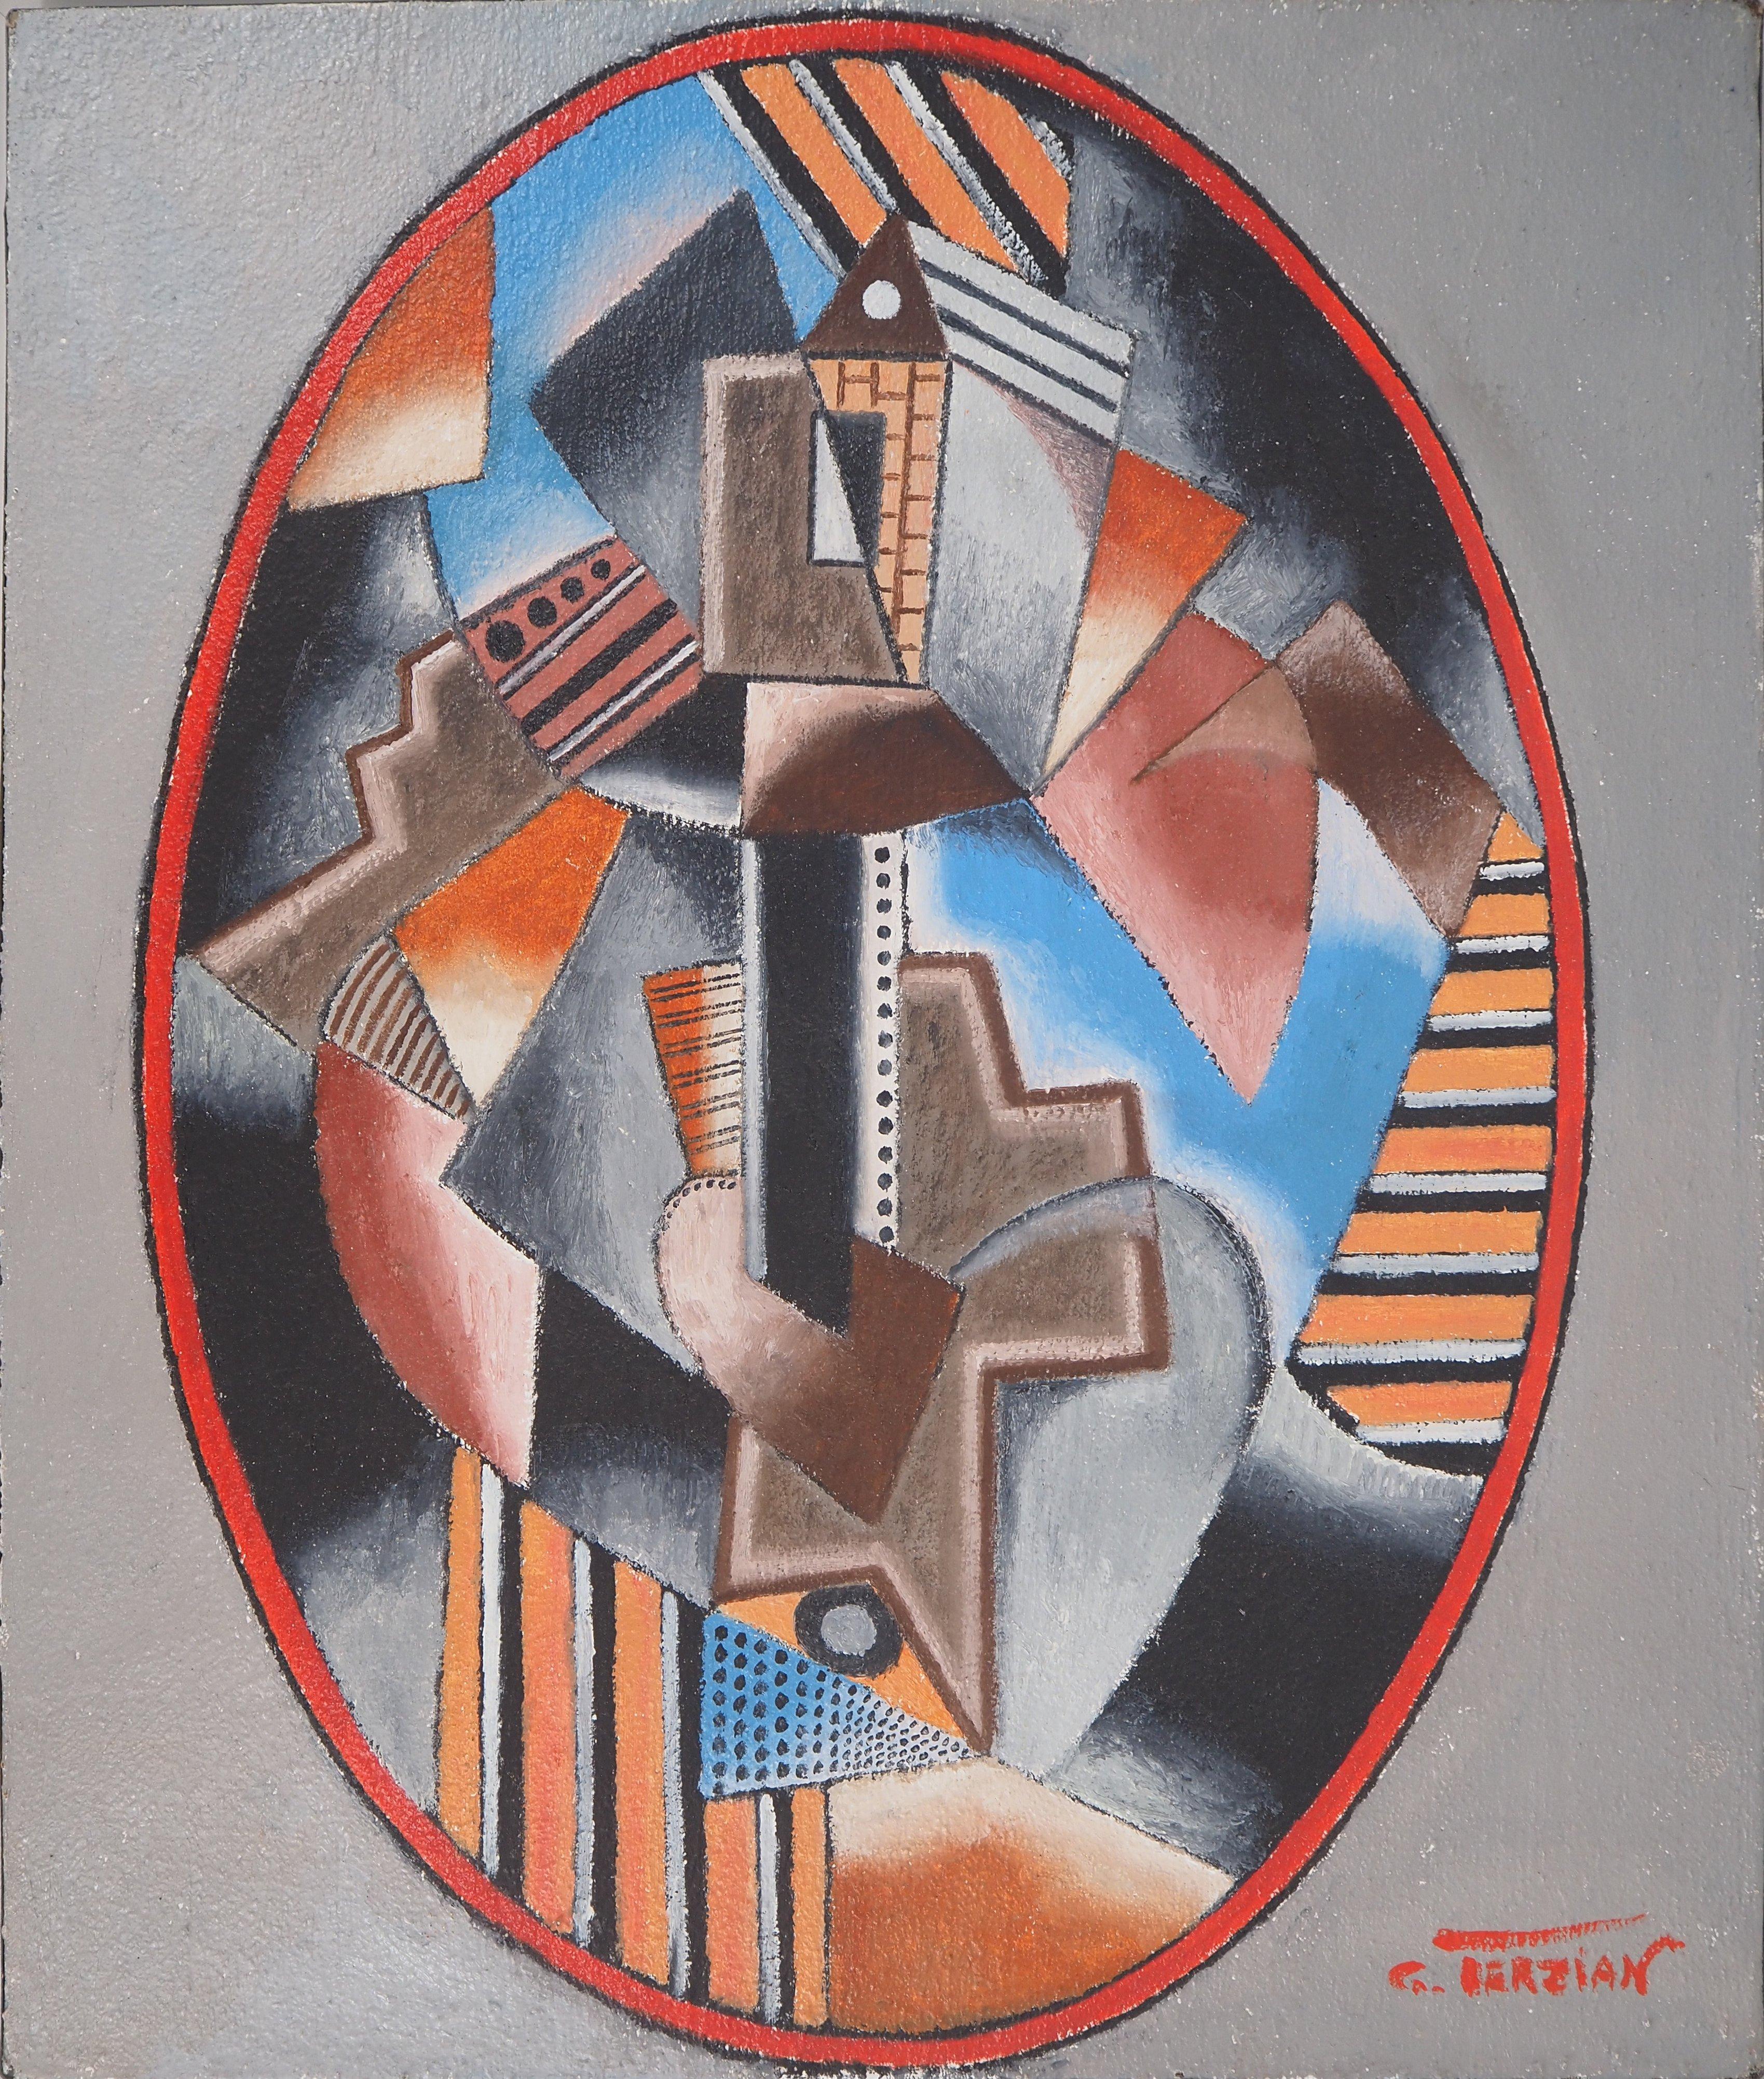 House on the Hill (Cubist Composition) - Original oil on canvas, Handsigned - Painting by Georges Terzian